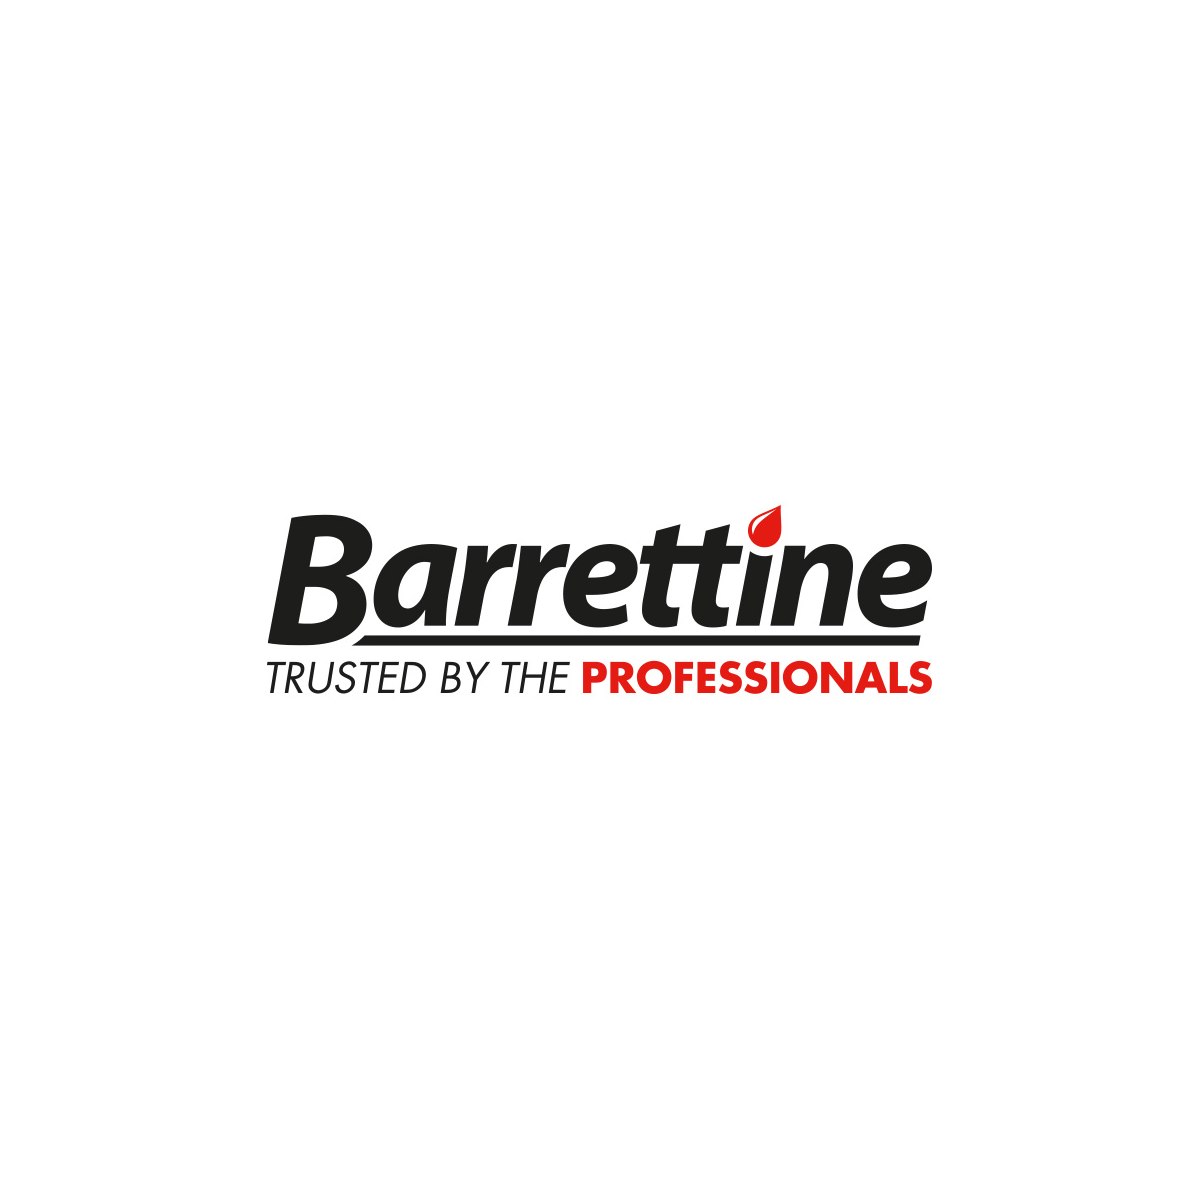 Where to buy Barrettine Products